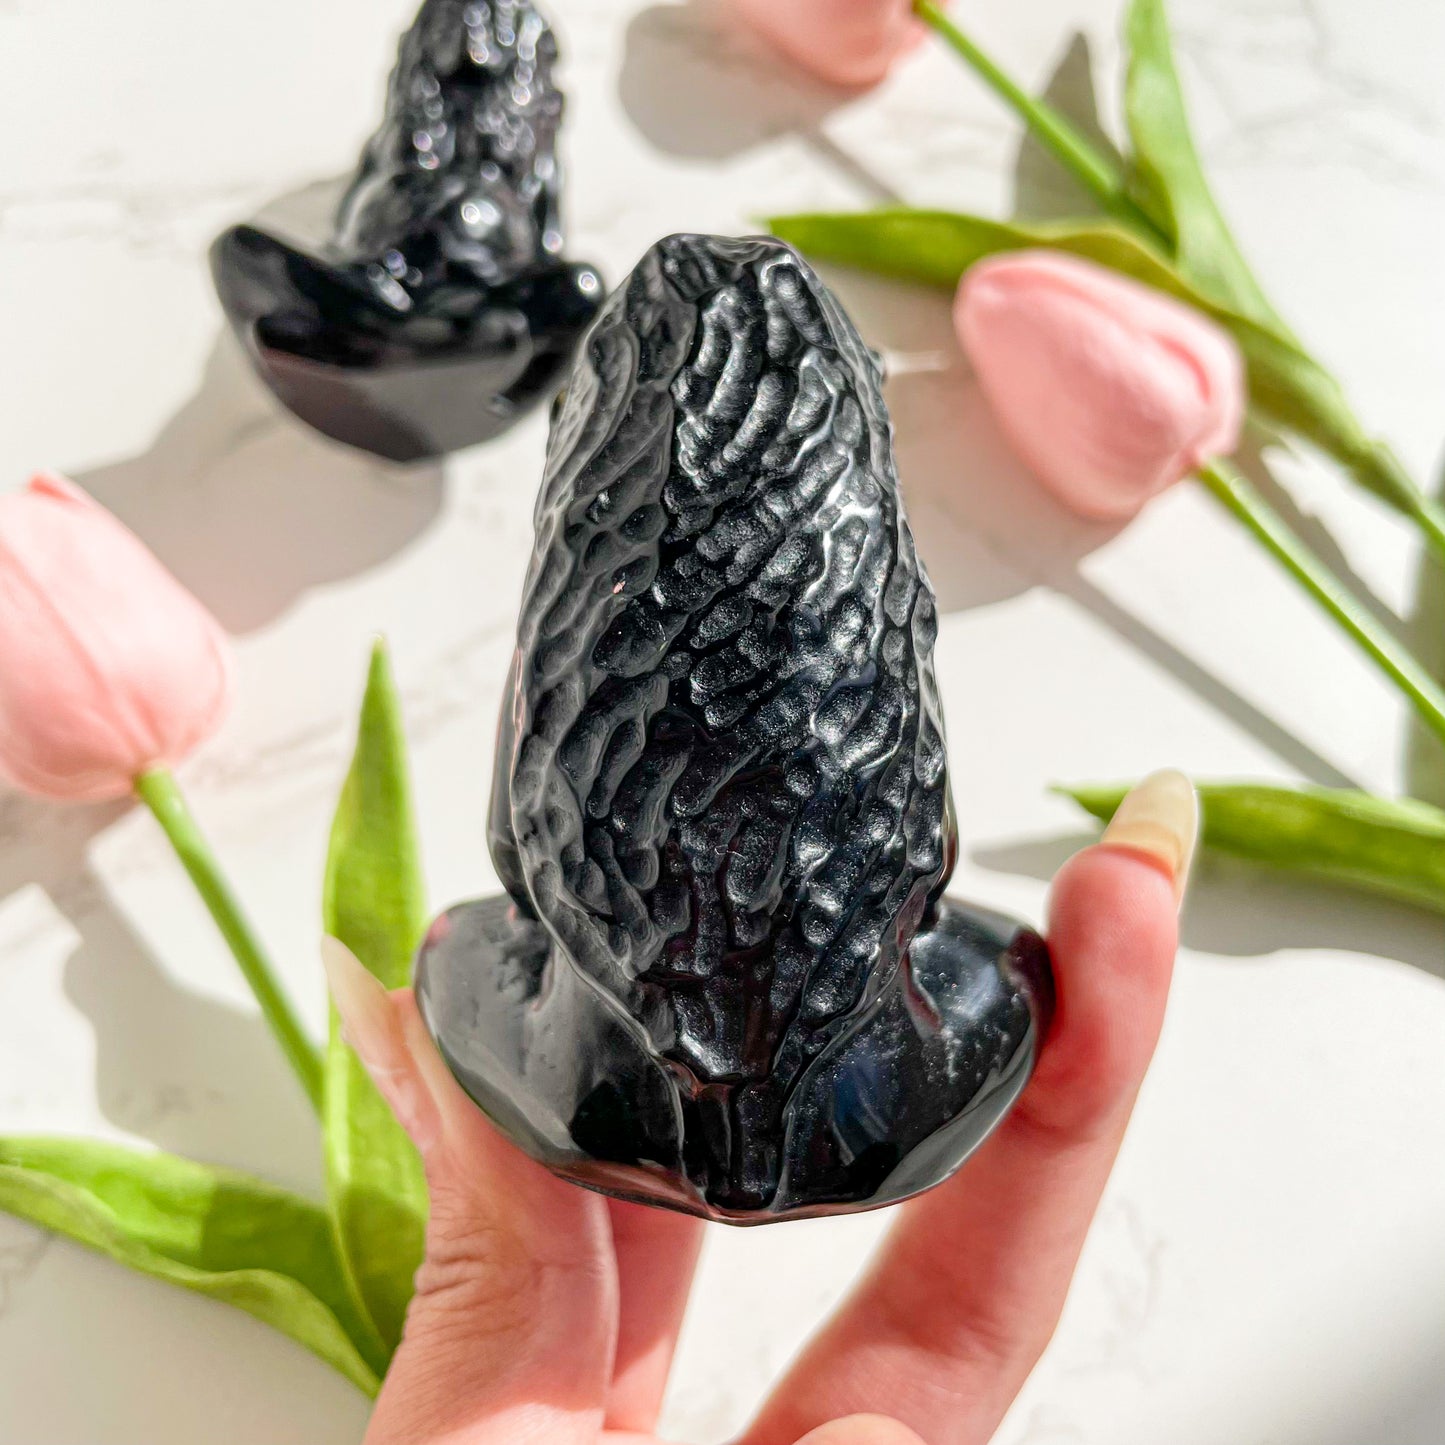 Obsidian Mother Earth carving